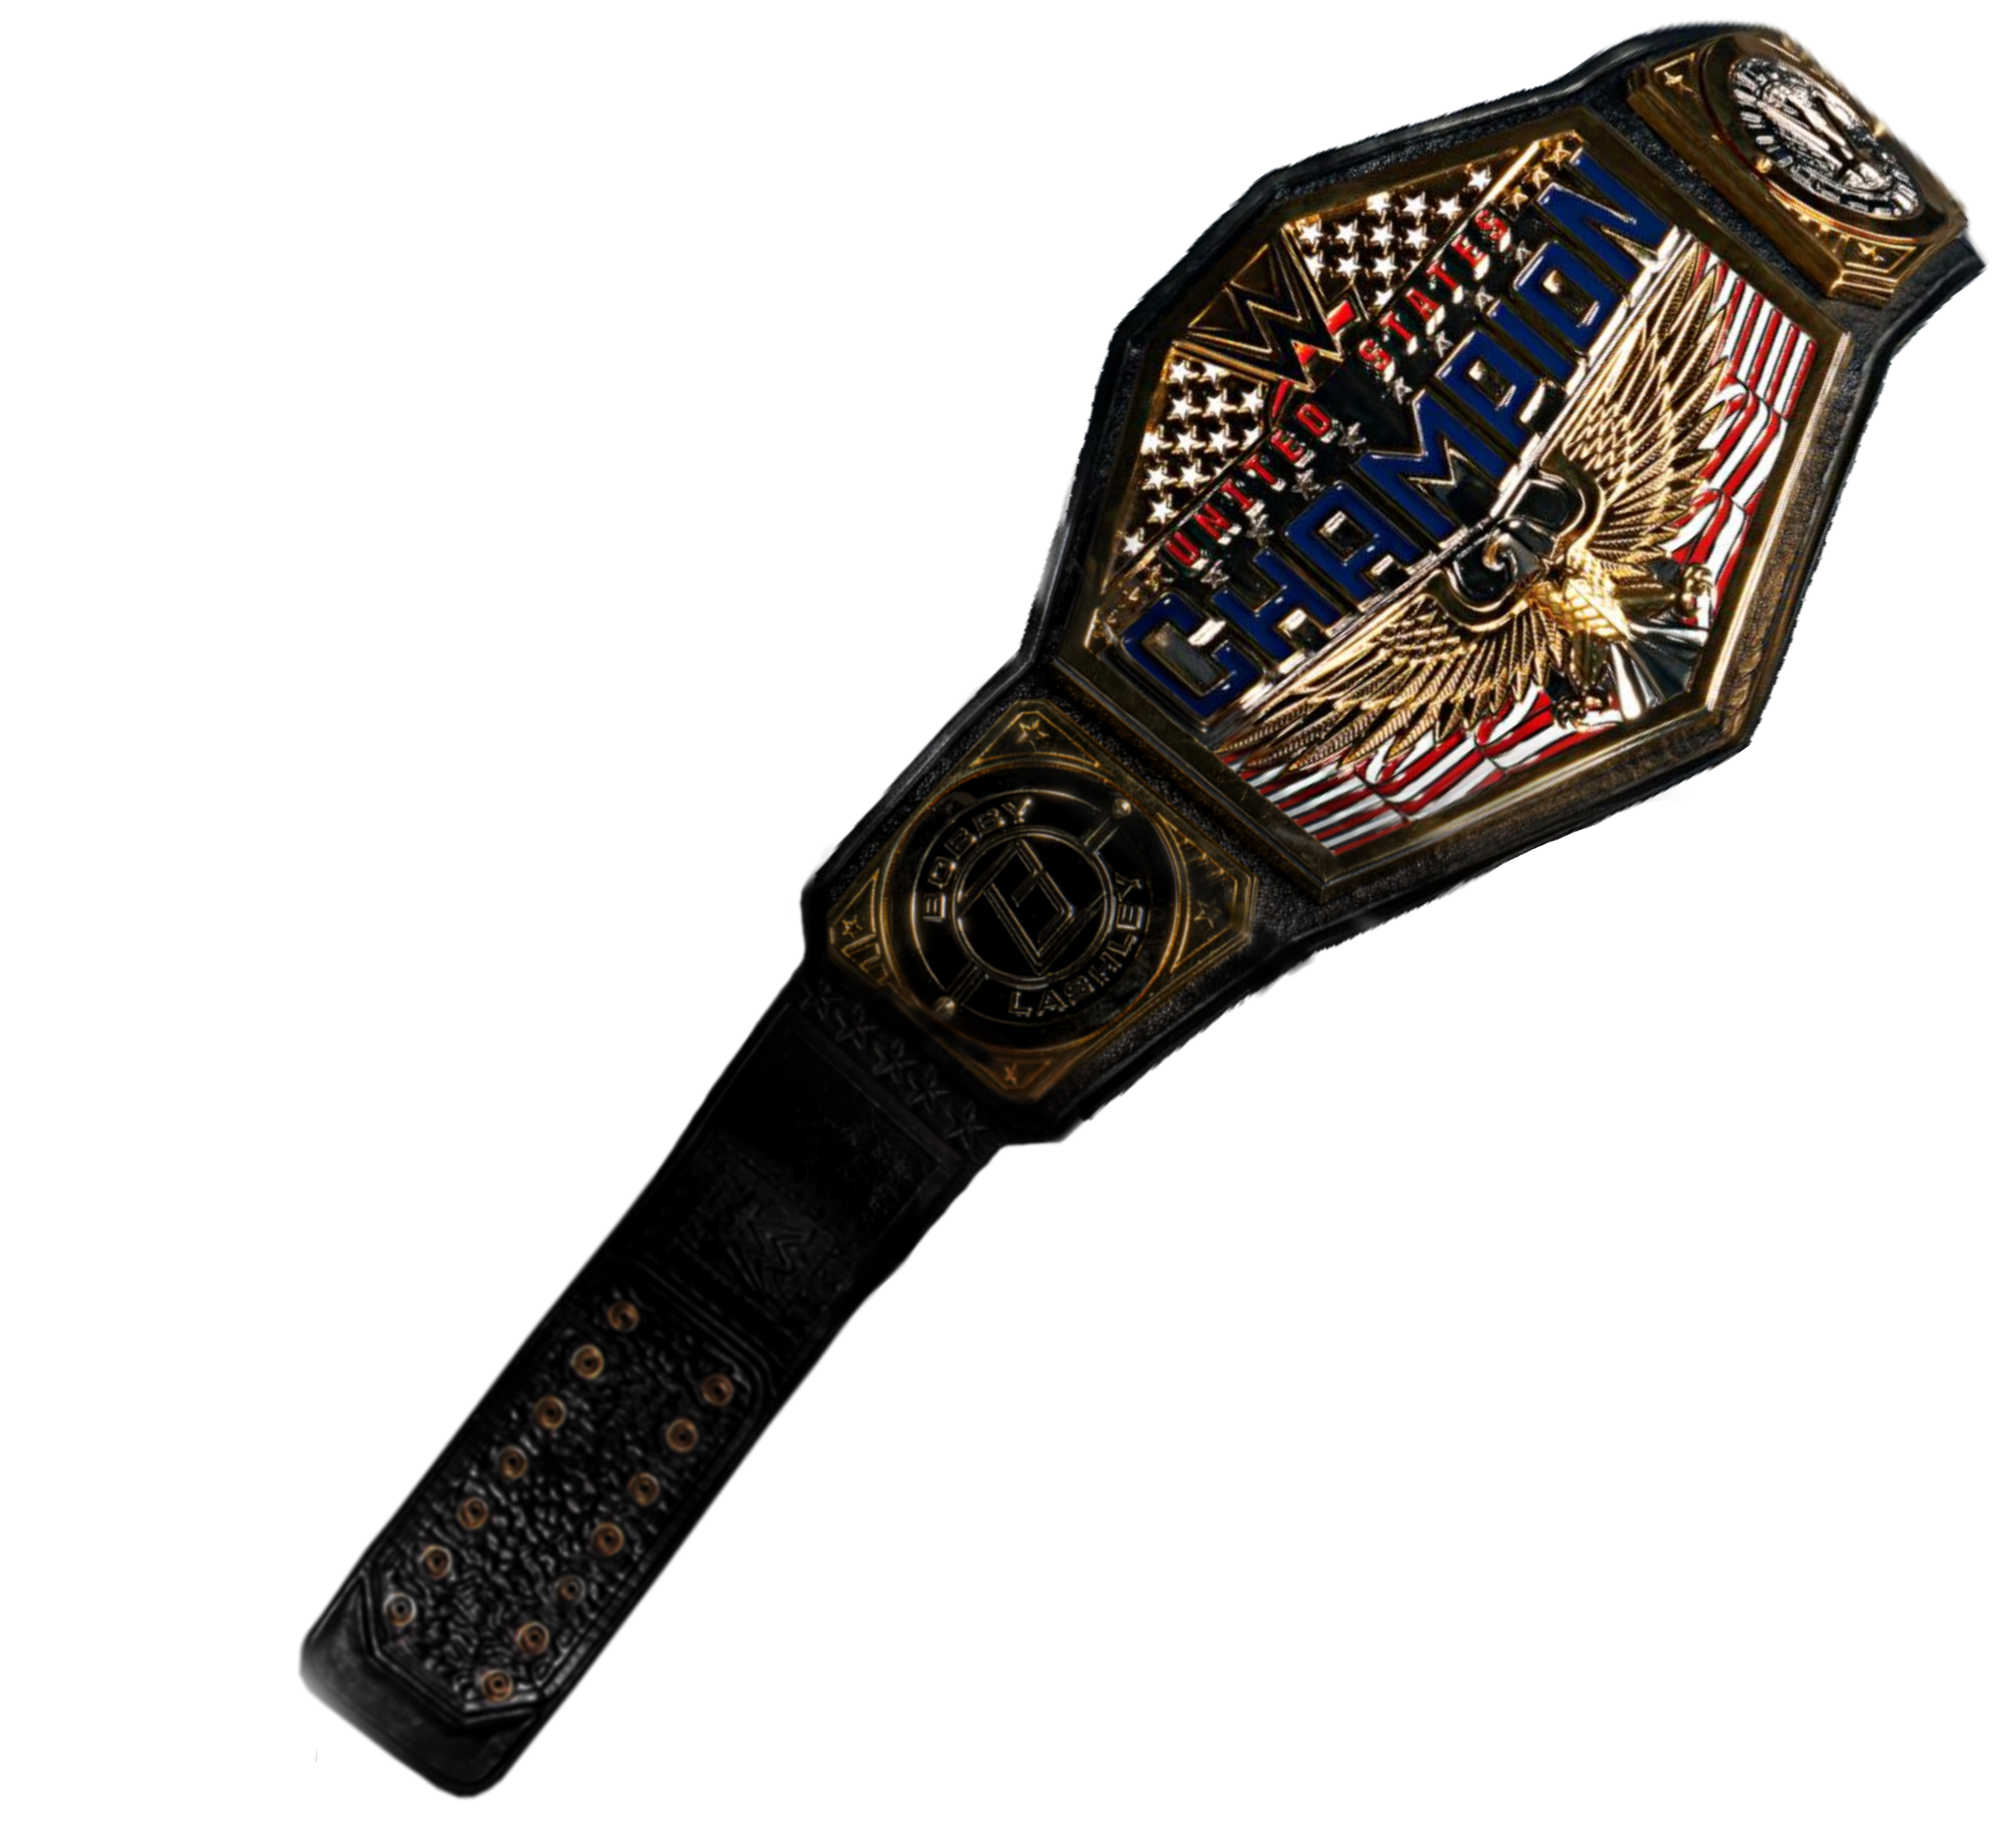 Us Championship Title Render By Wwe Designers By Wwedesigners On Deviantart